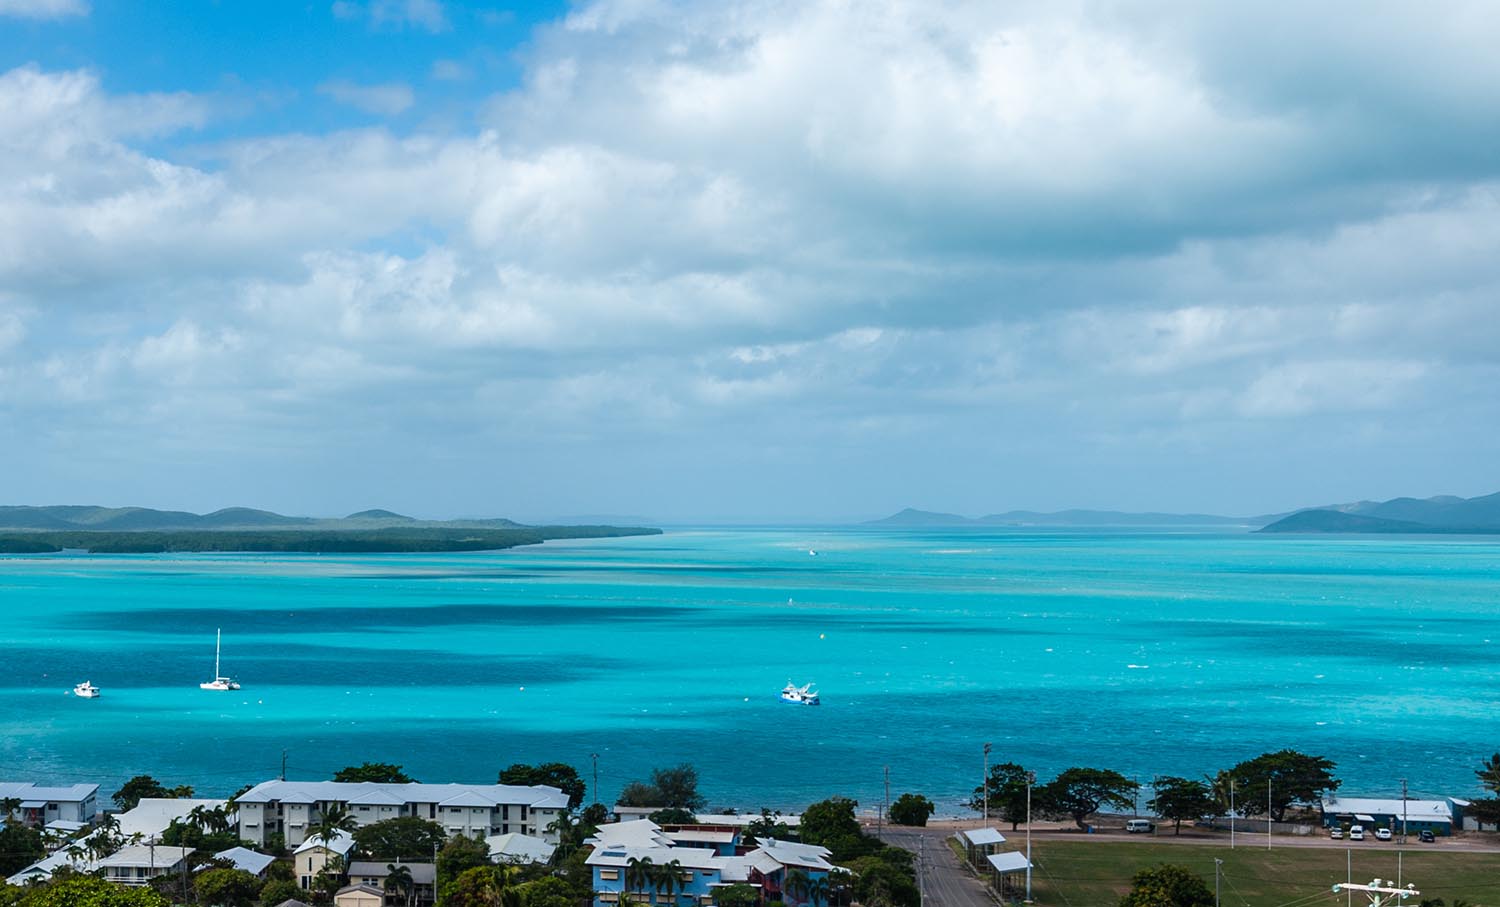 A view from high up of a bright, warm ocean and islands.